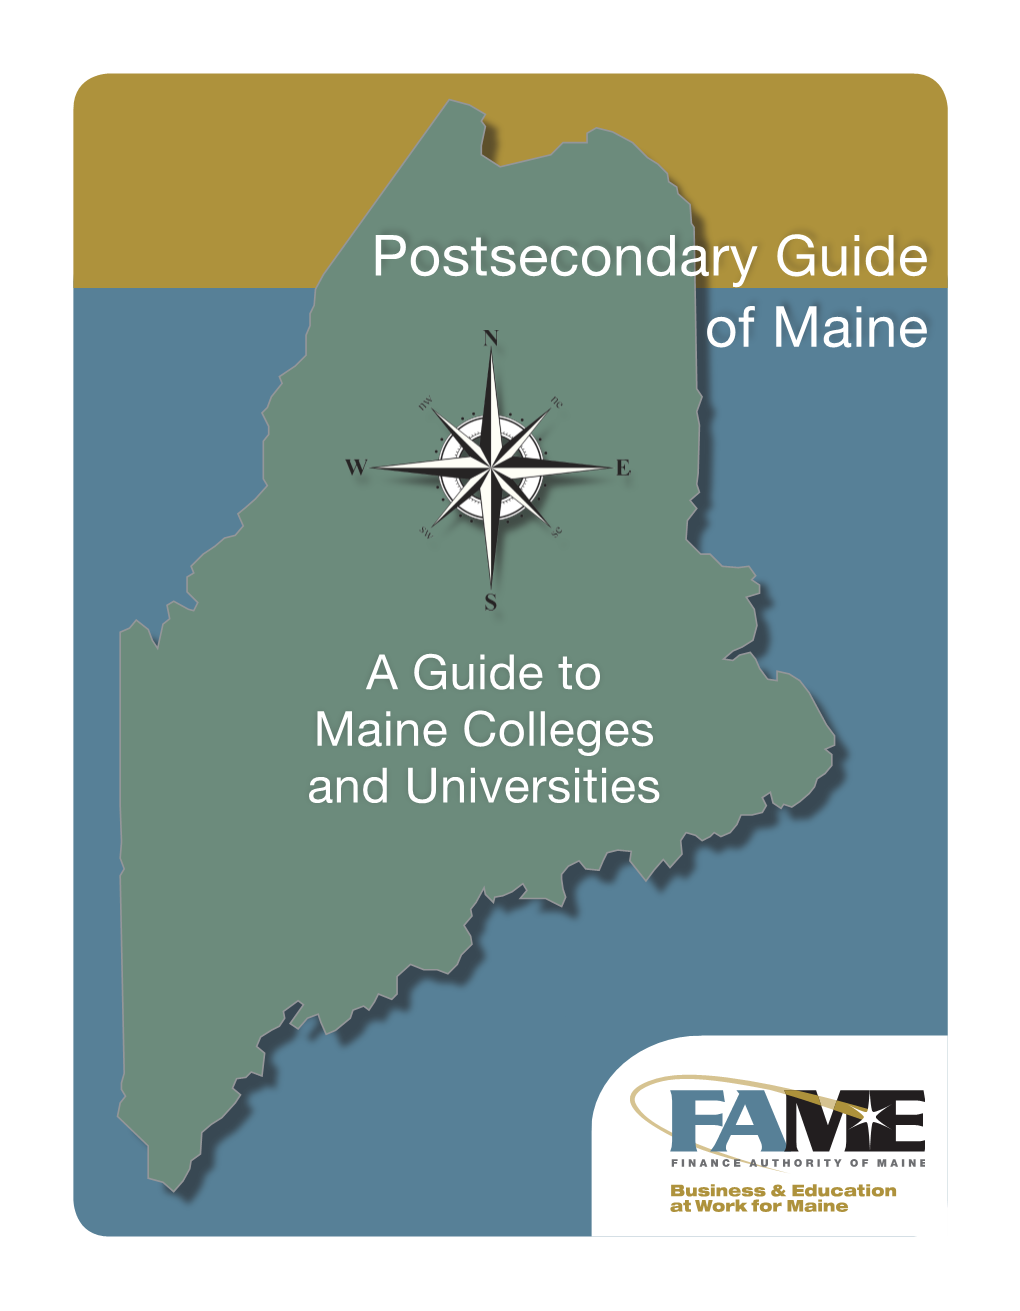 Postsecondary Guide of Maine